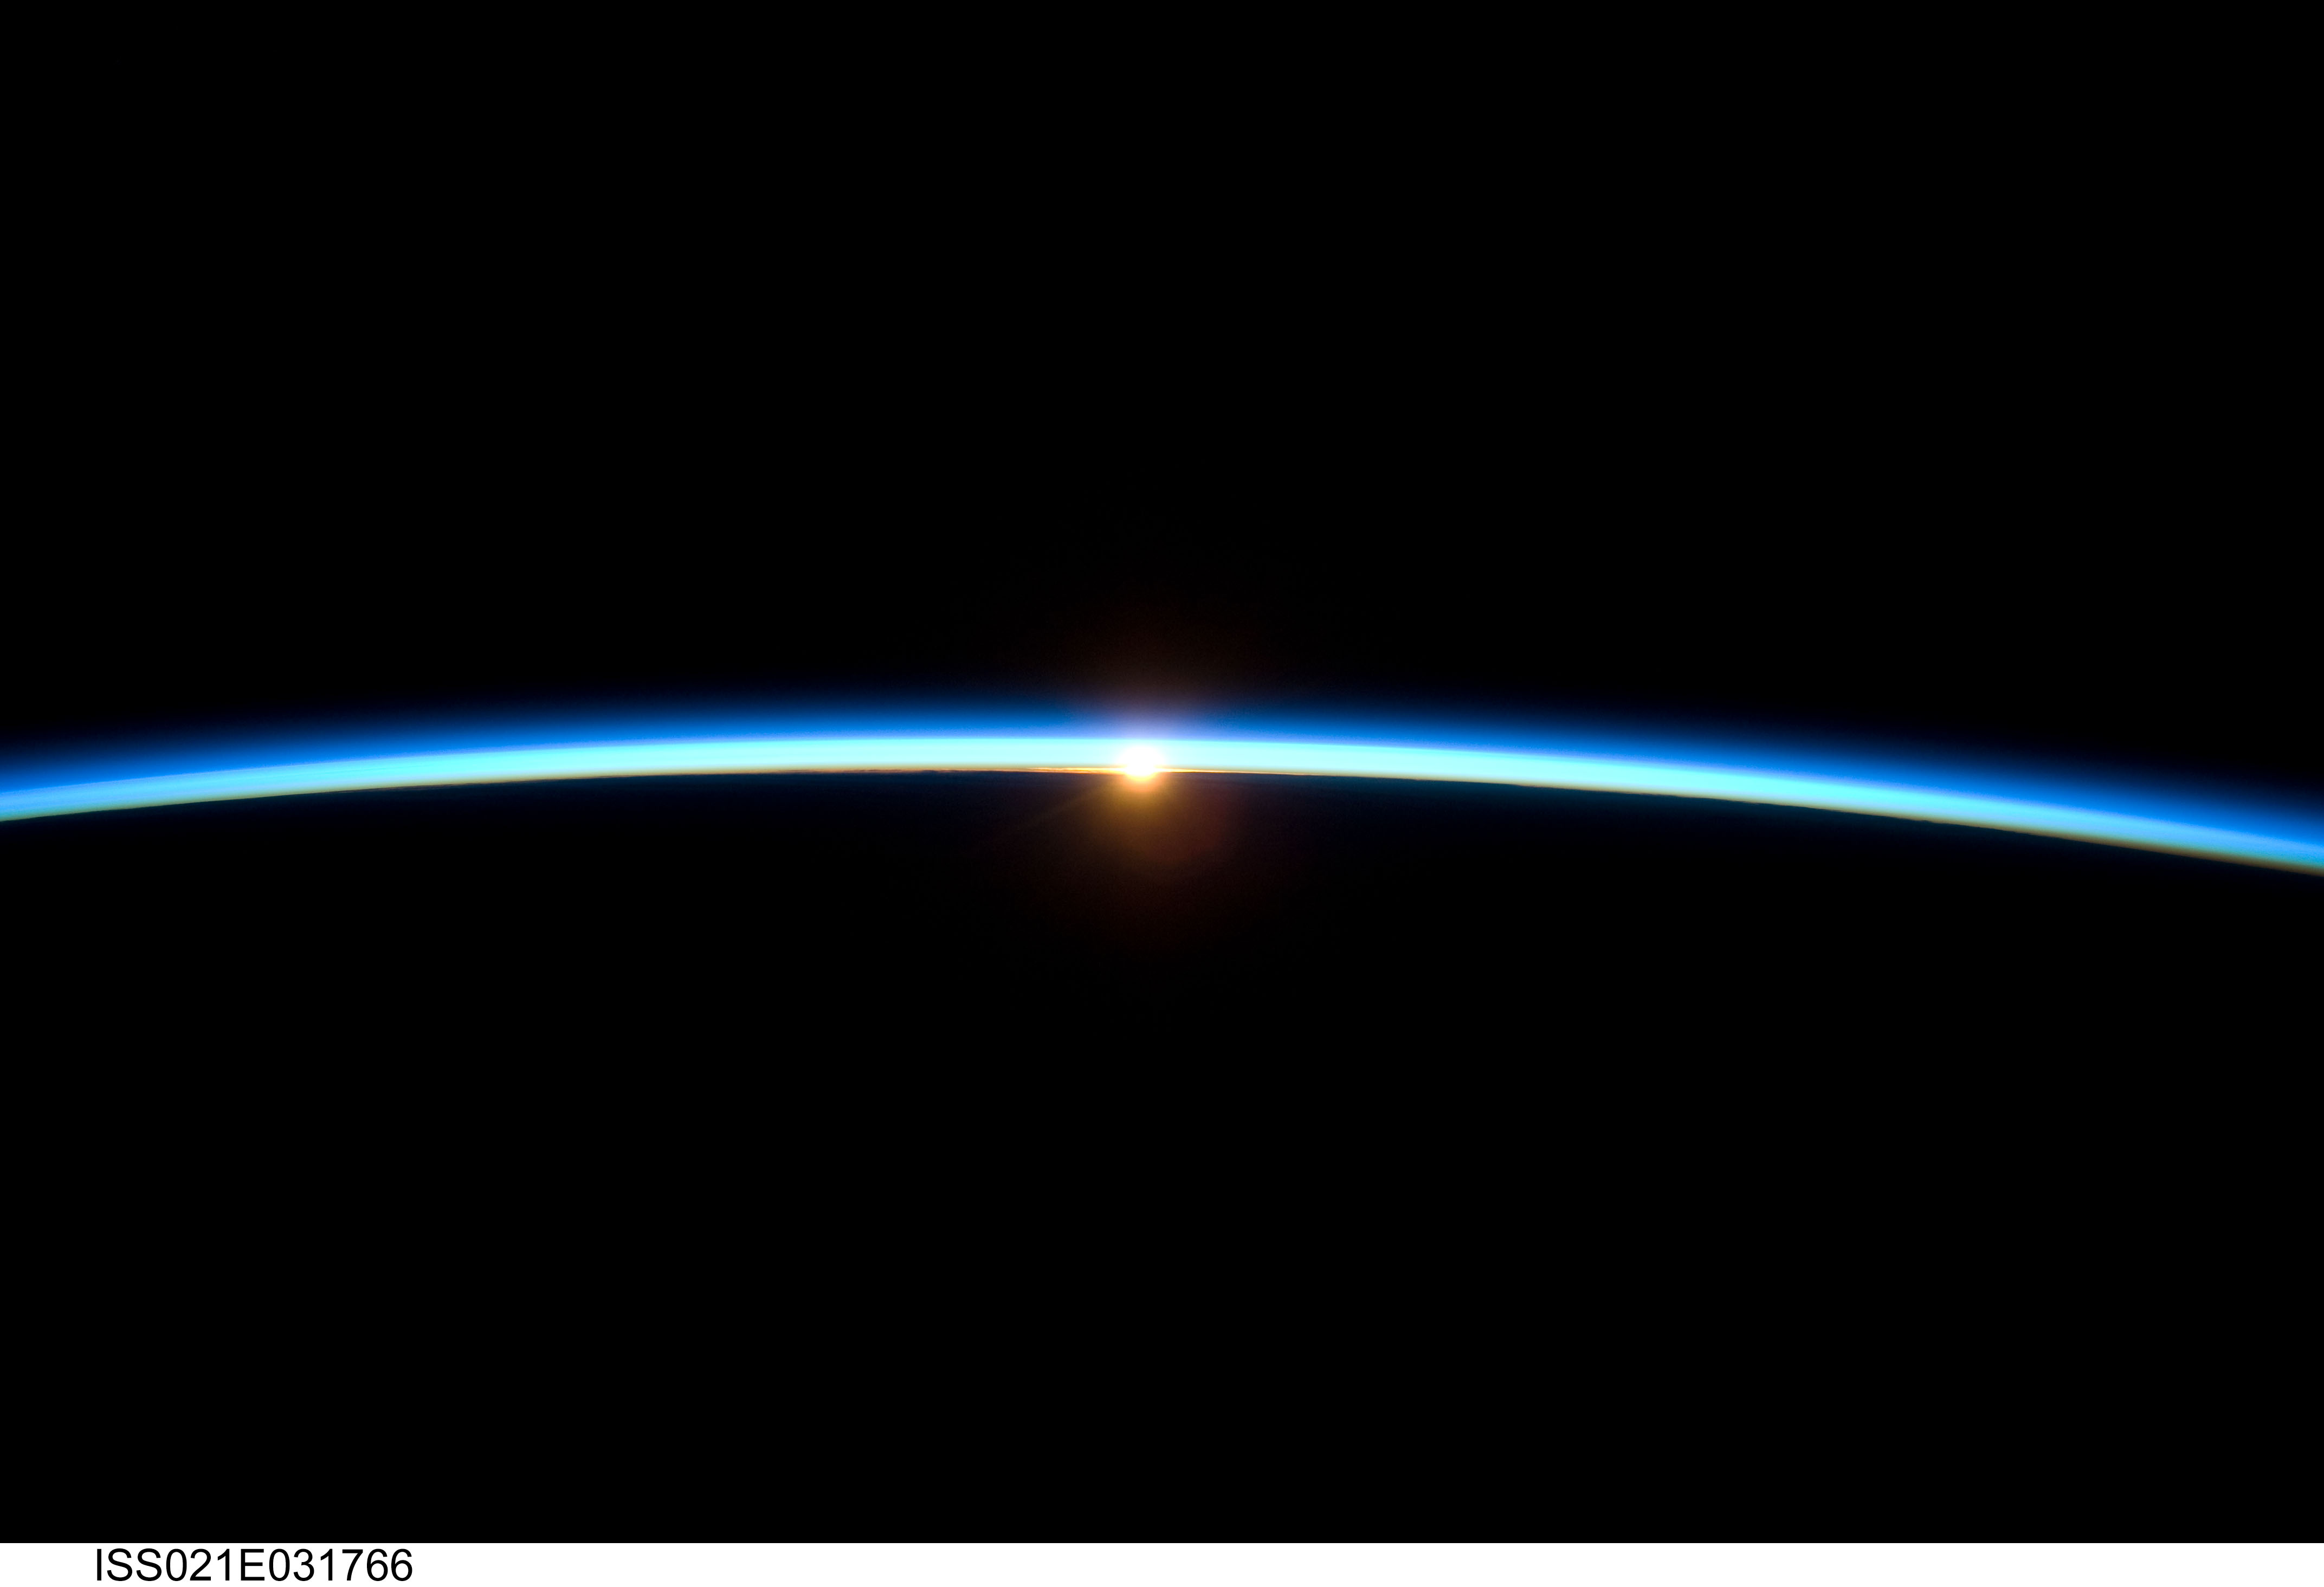 Sunset Over Earth (NASA, International Space Station Science, 11/23/09)